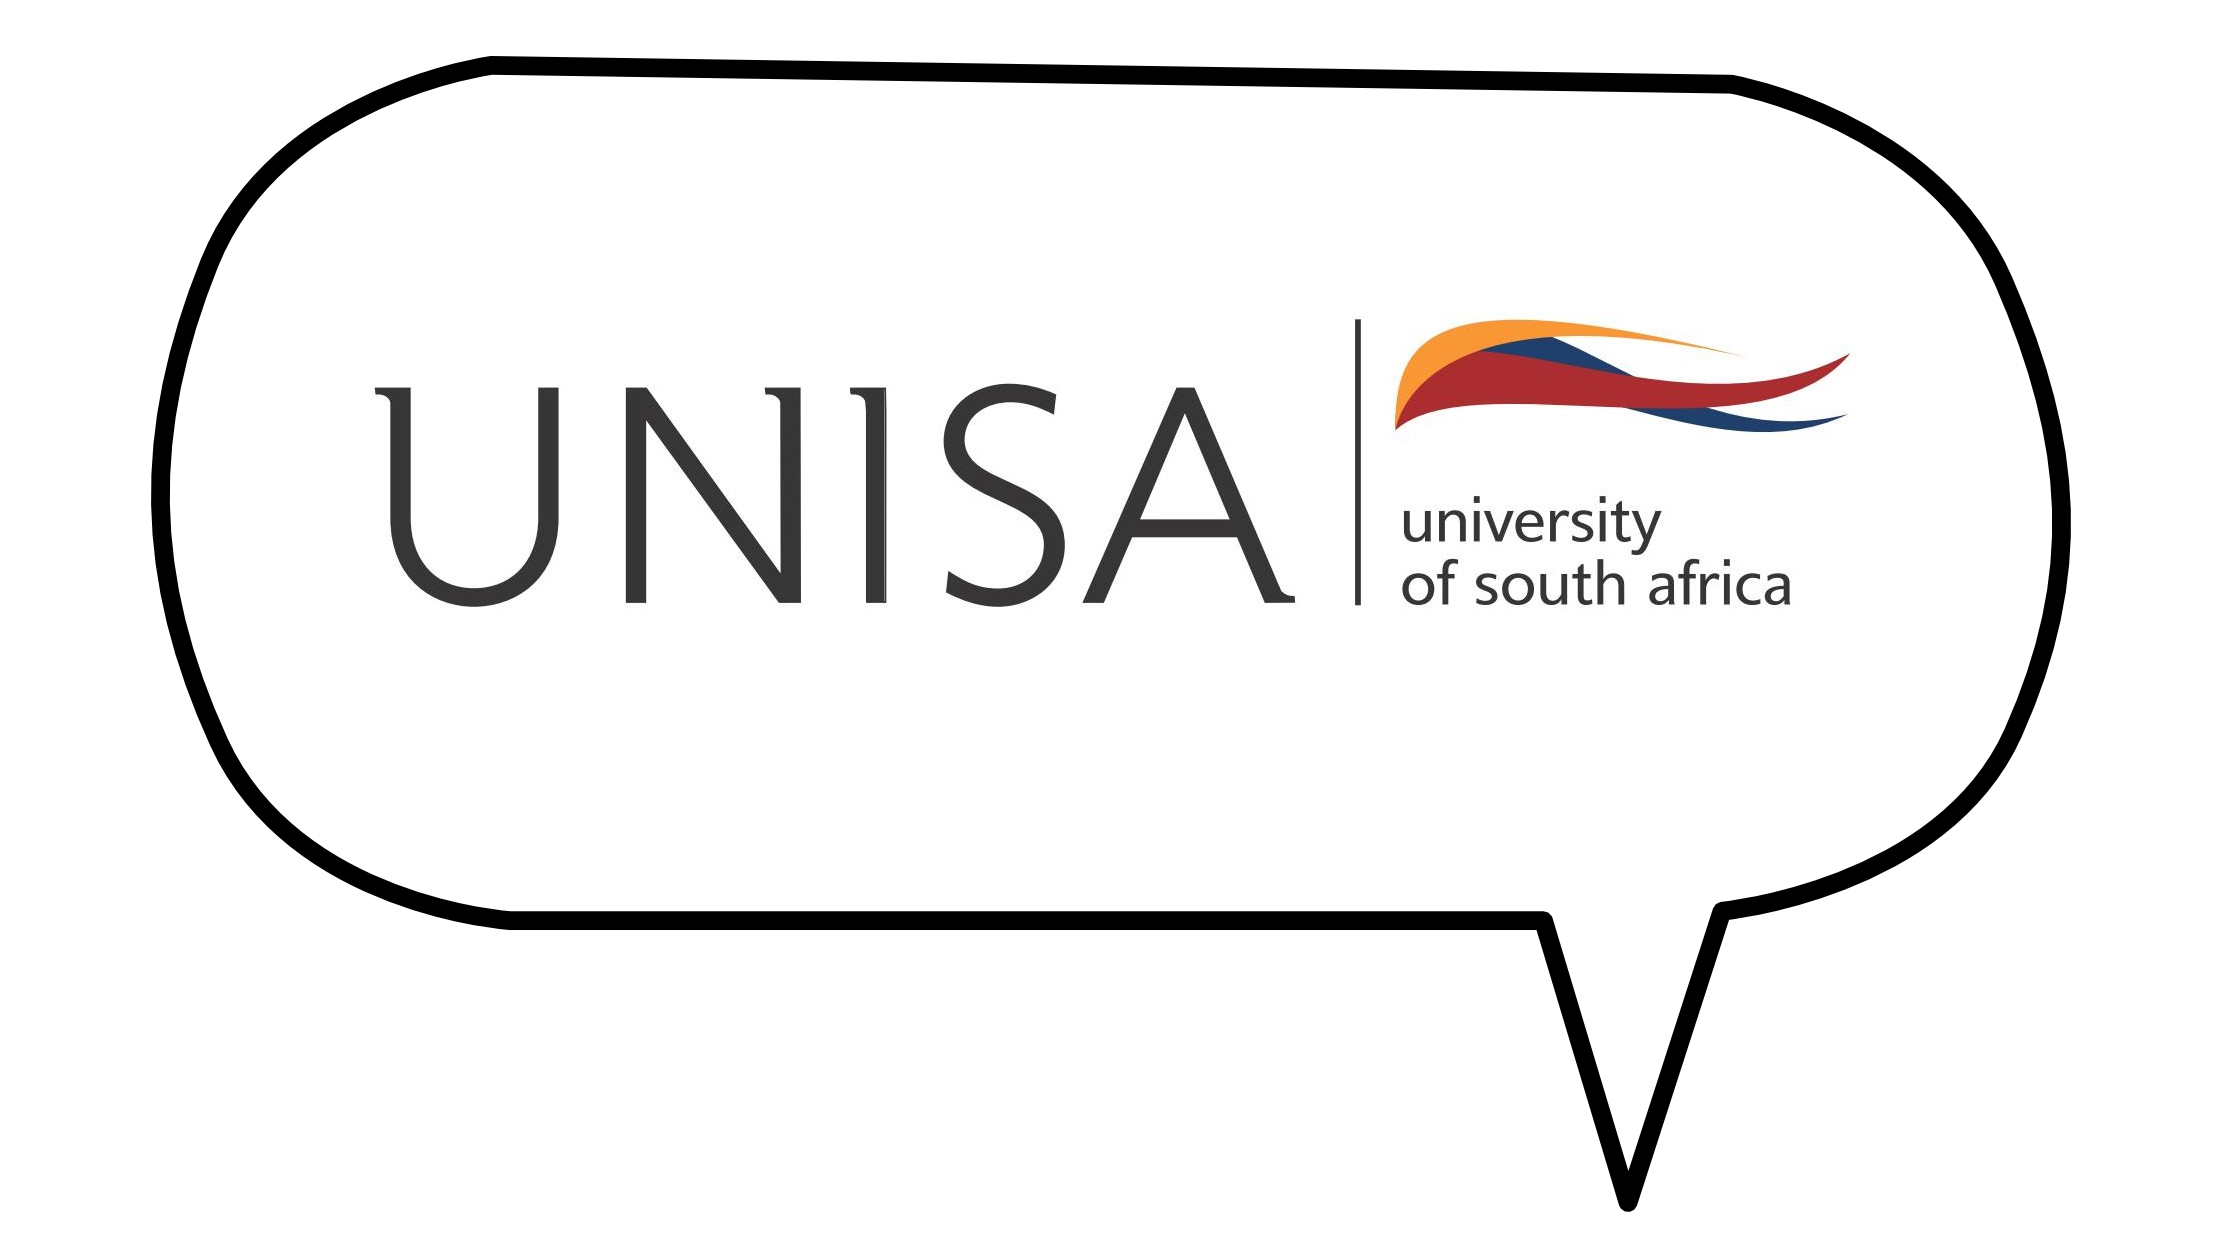 I Completed My Unisa Education in A Country Other than South Africa. What Should I Do?